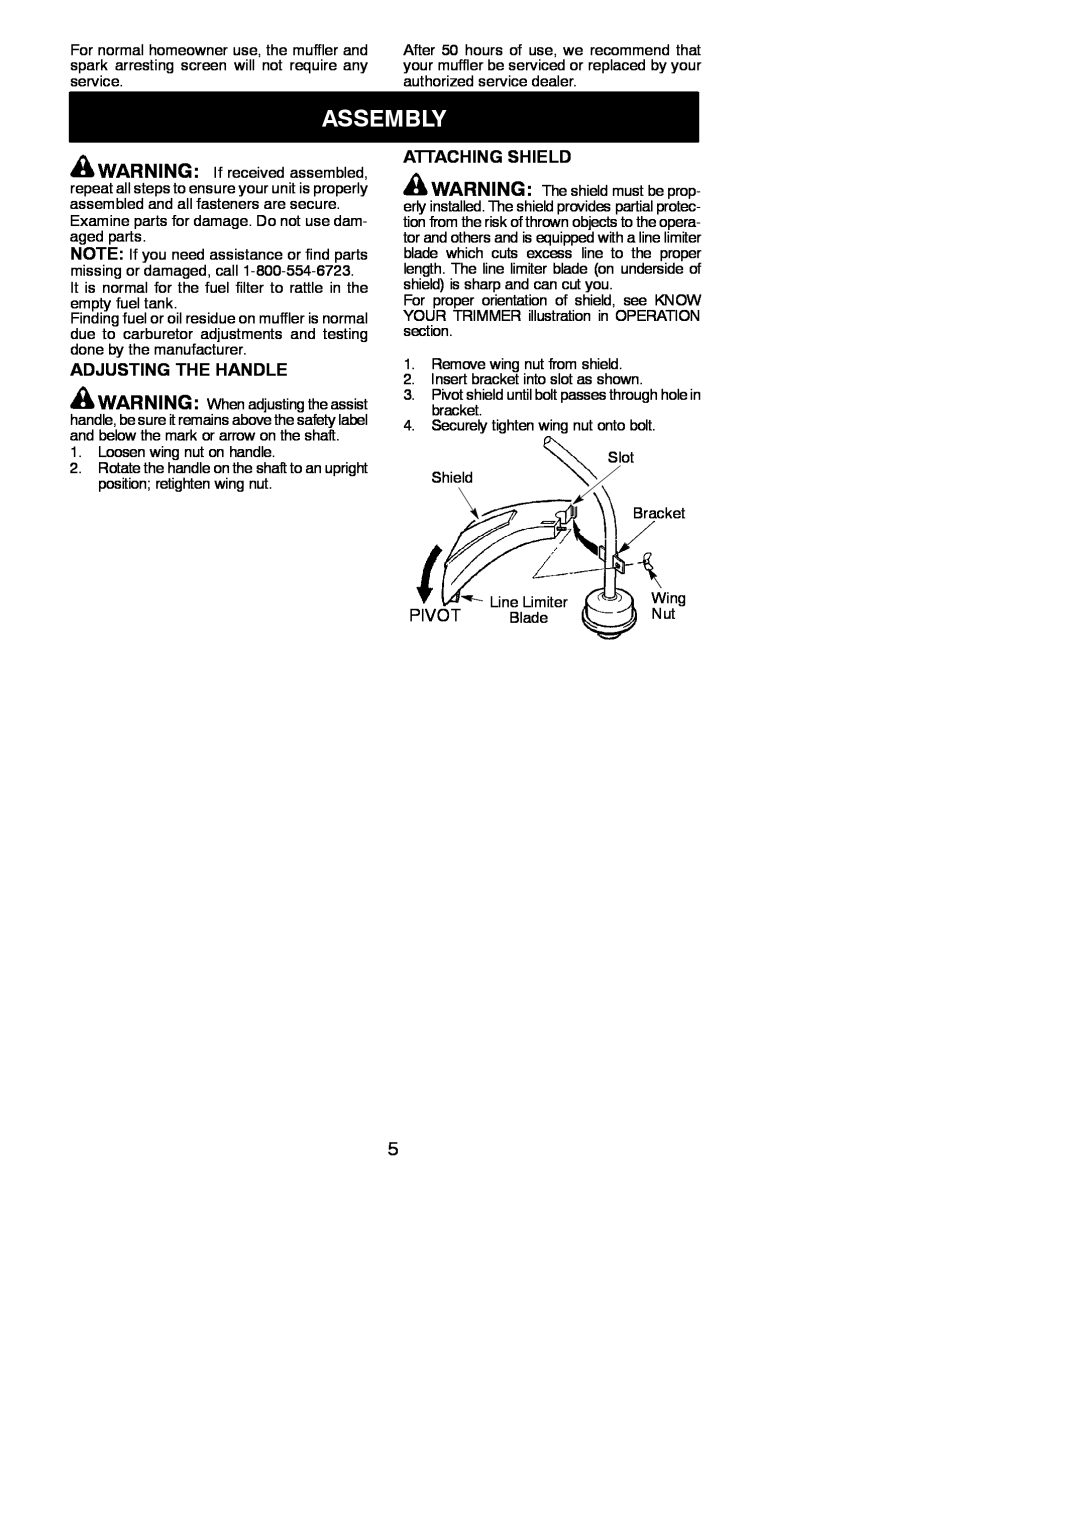 Weed Eater 545186831 instruction manual Assembly, Adjusting The Handle, Attaching Shield, Pivot 